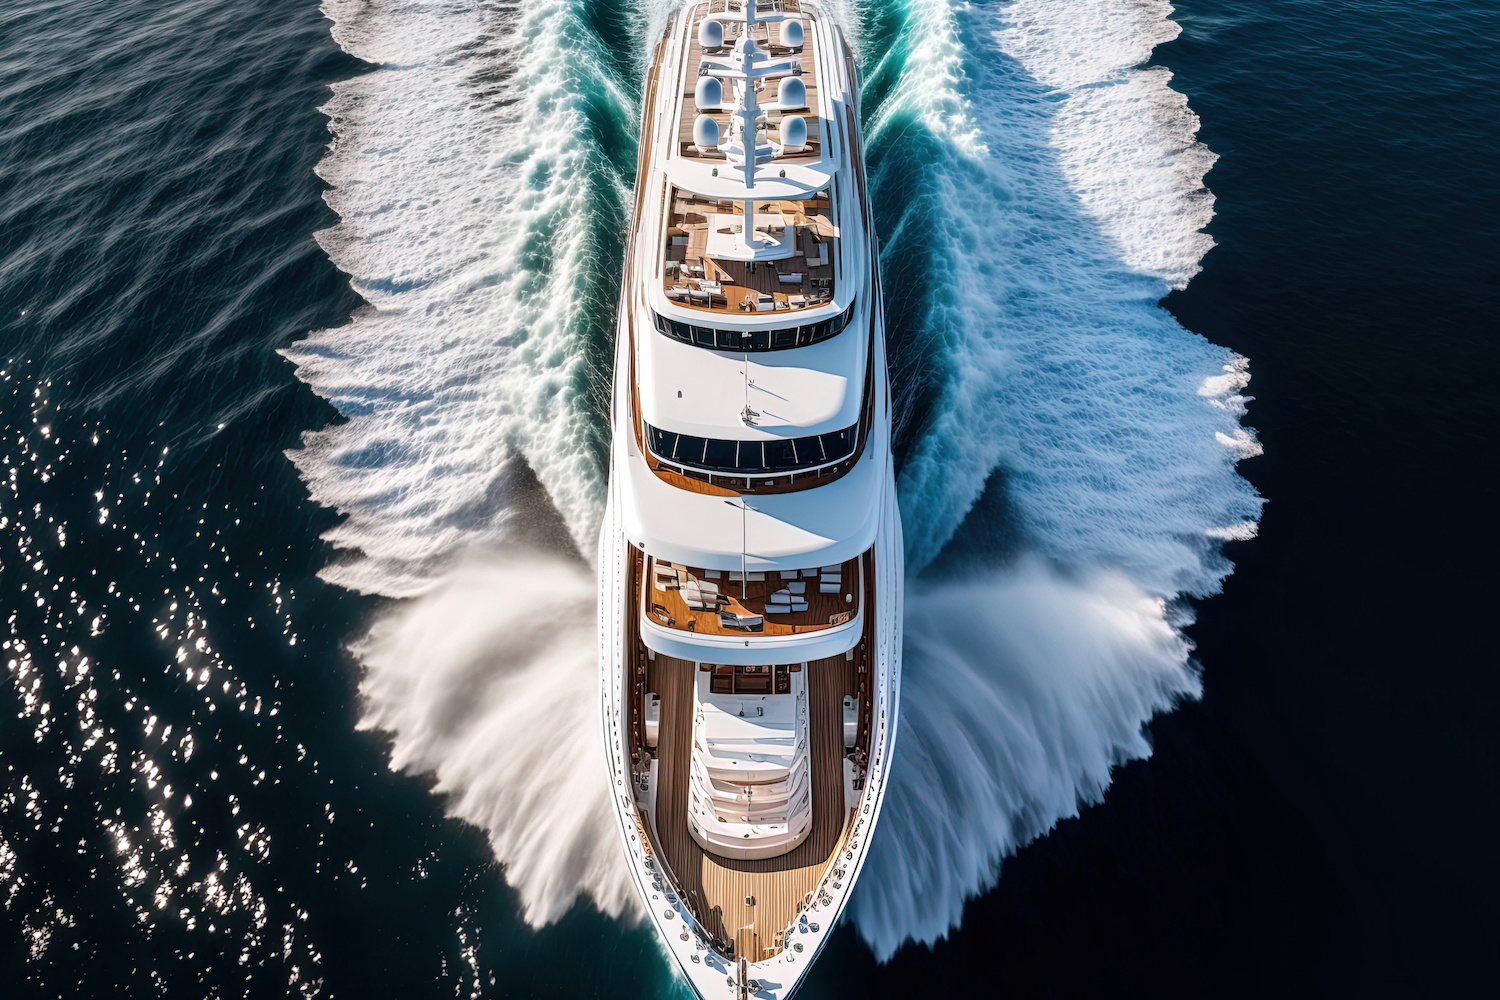 Castor proud to be the VSAT provider to the winner of the 2018 Yacht of the Year award: Superyacht DAR.